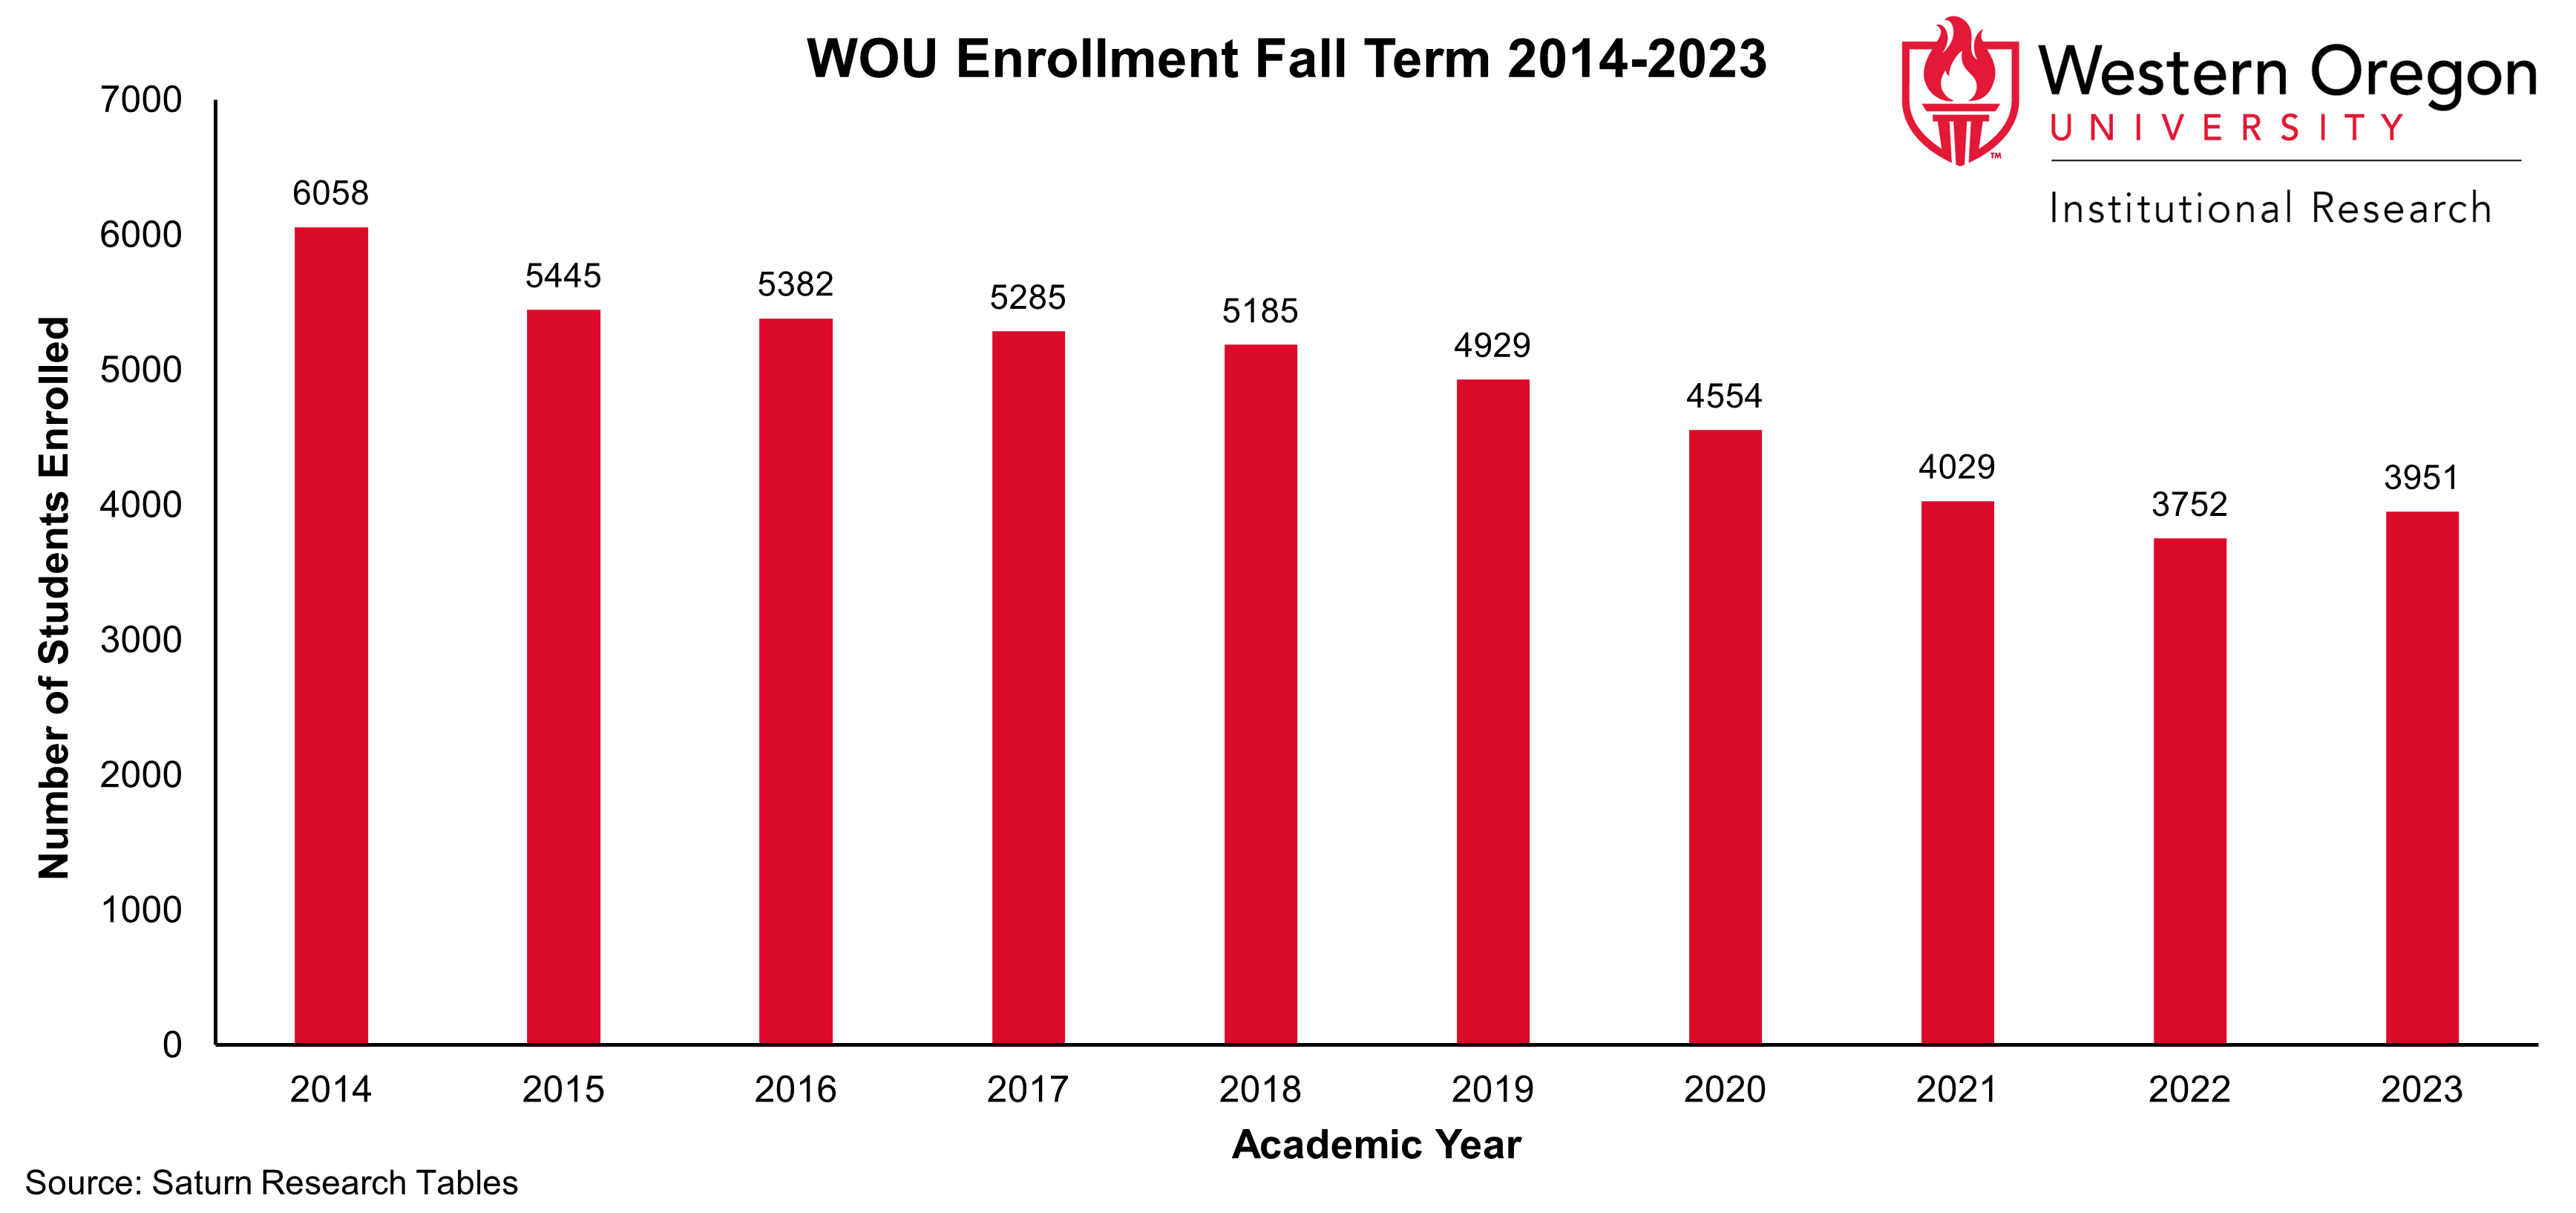 Bar graph of Fall enrollment counts since Fall 2014 for WOU students, showing that enrollment has been steadily declining since Fall 2014, with a small increase from Fall 2022 to Fall 2023.